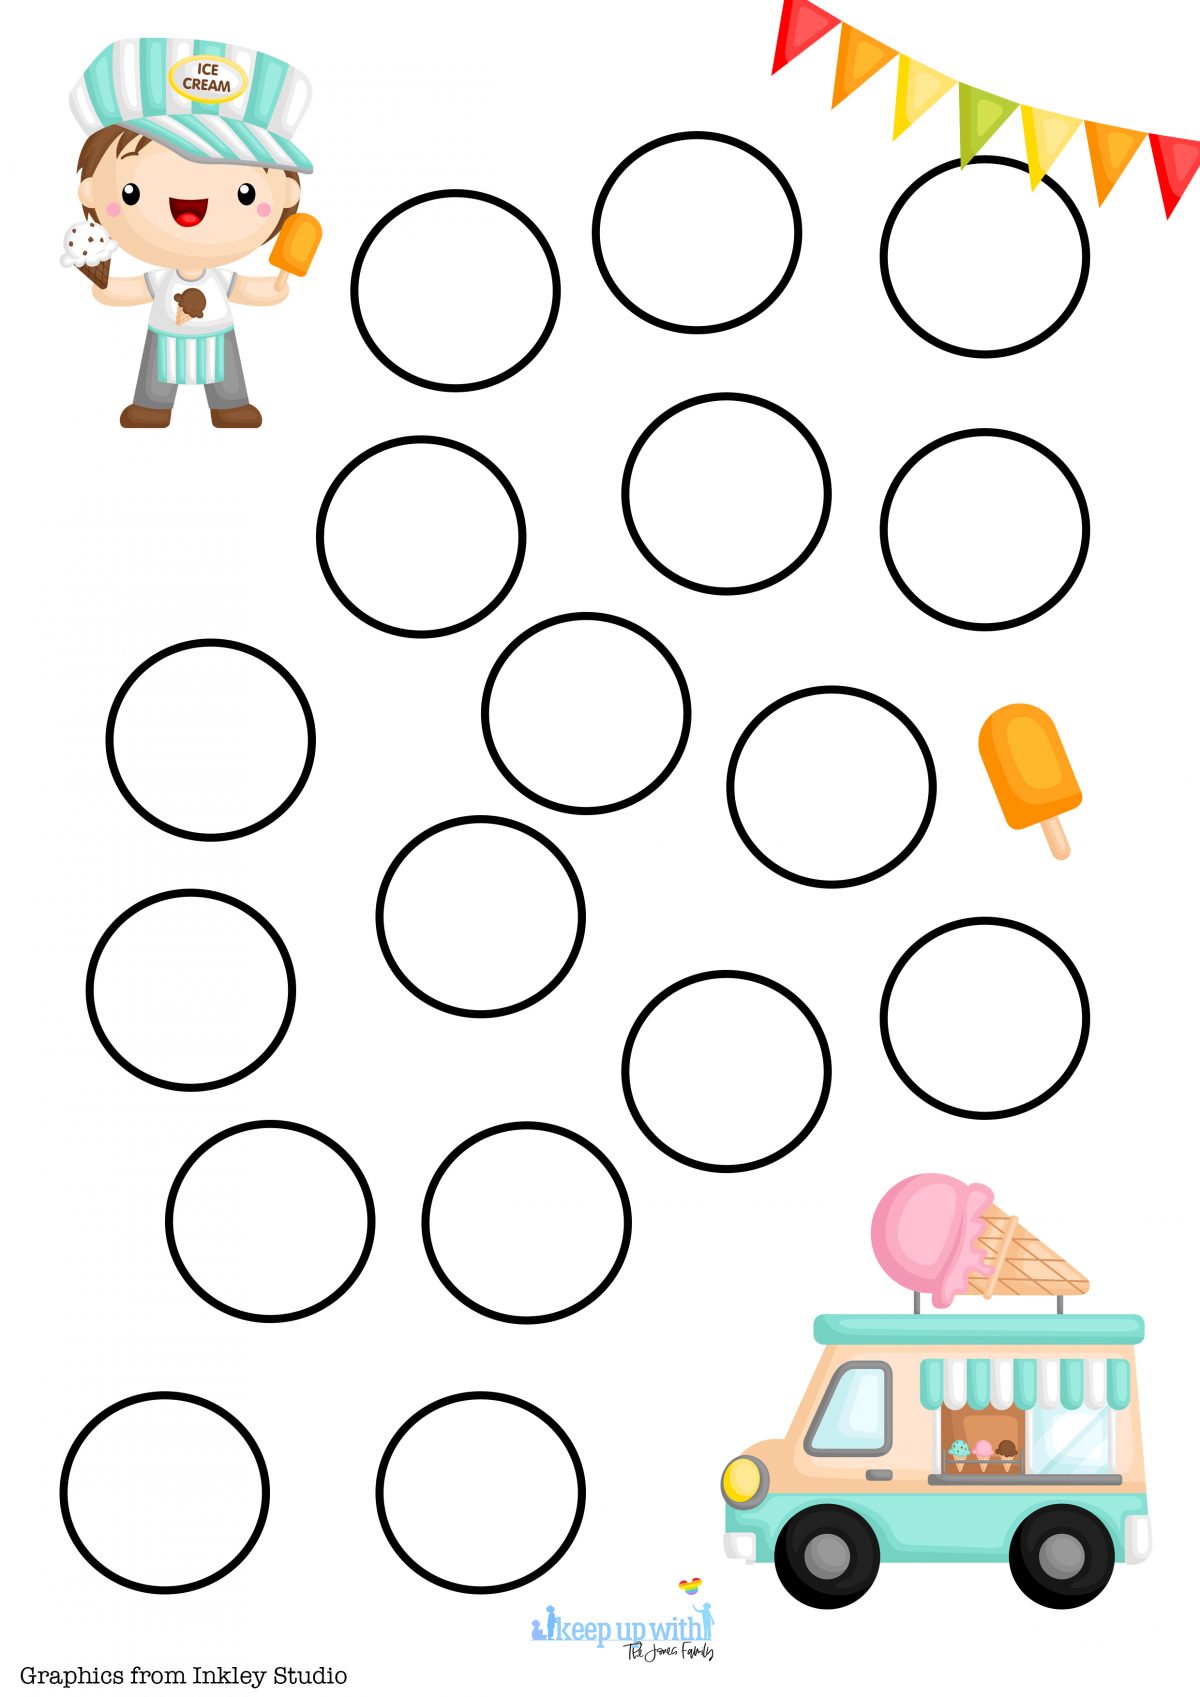 Simple and fun mental arithmetic template for addition and multiplication games.